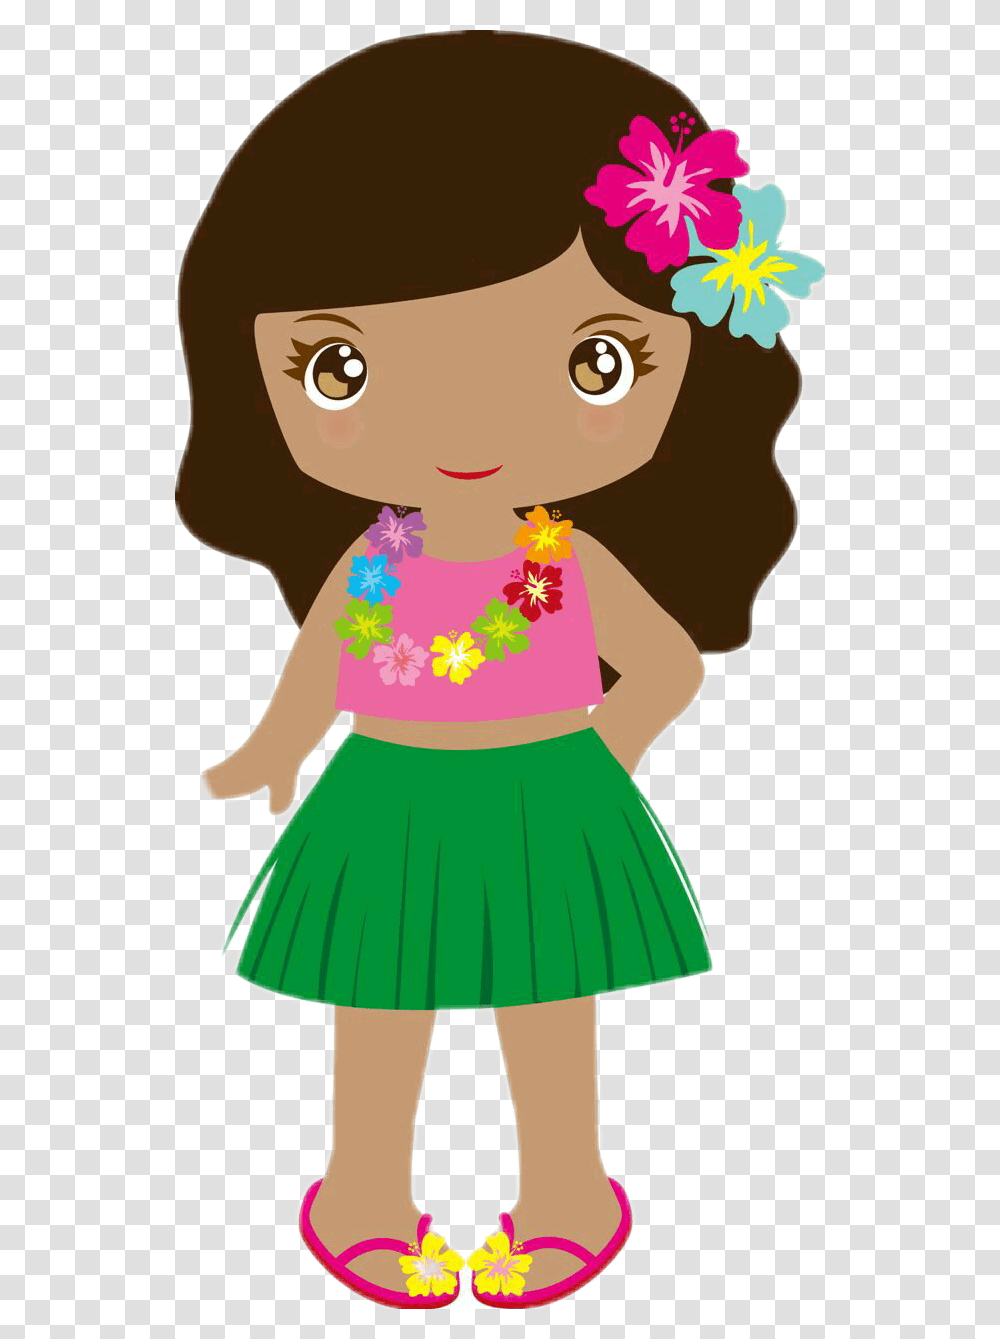 Popular And Trending Hawaii Eclipse Stickers, Skirt, Apparel, Doll Transparent Png